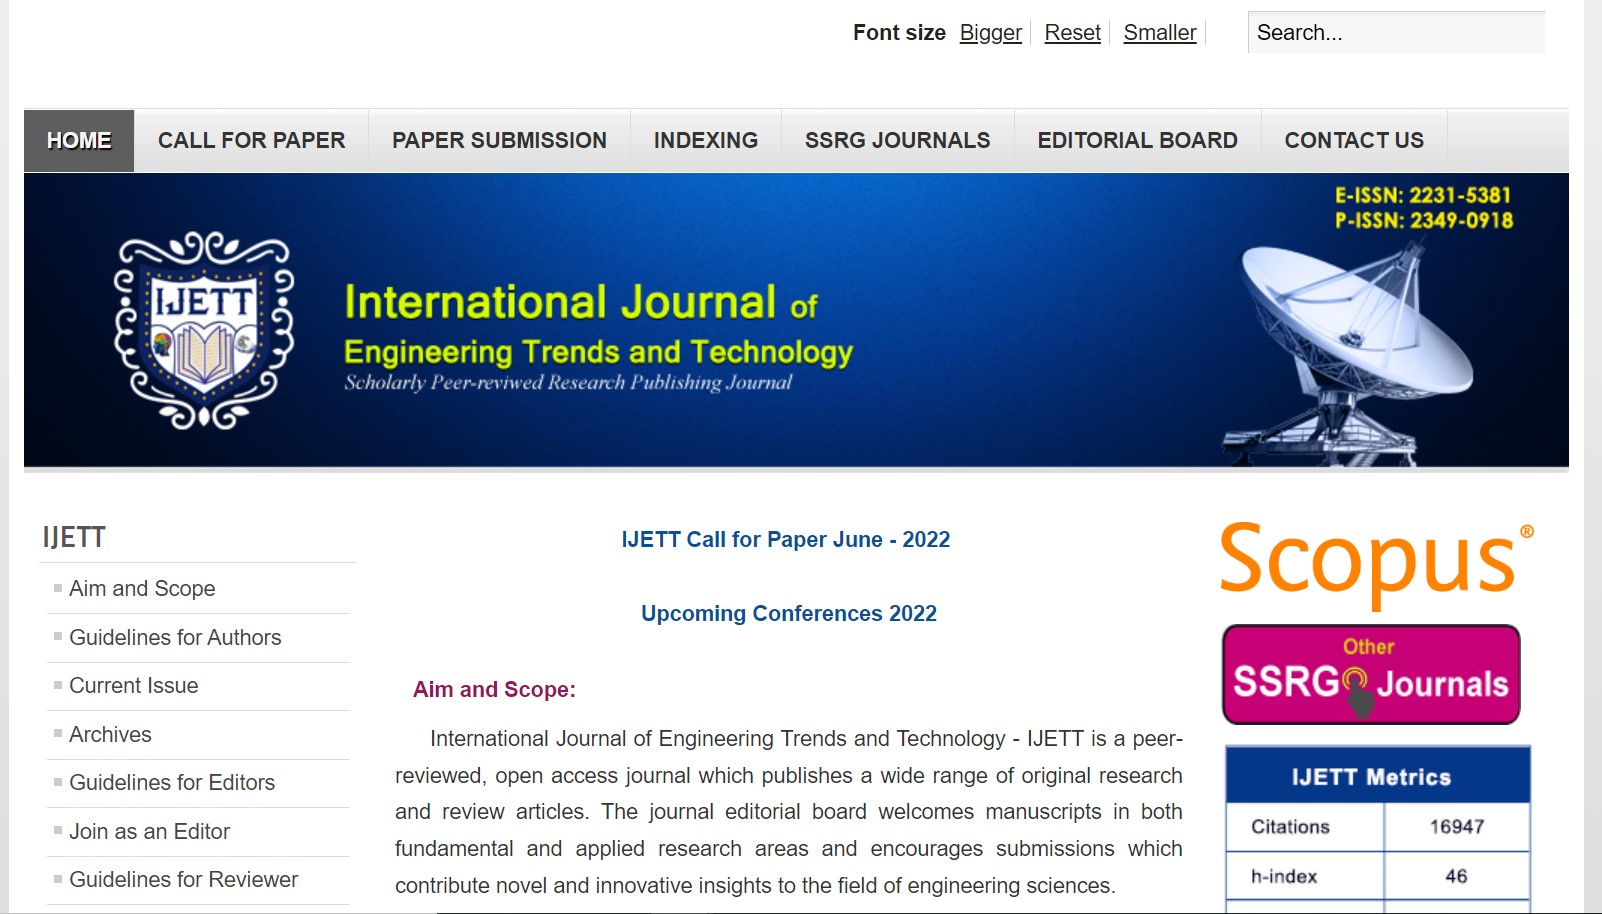 International Journal of Engineering Trends and Technology